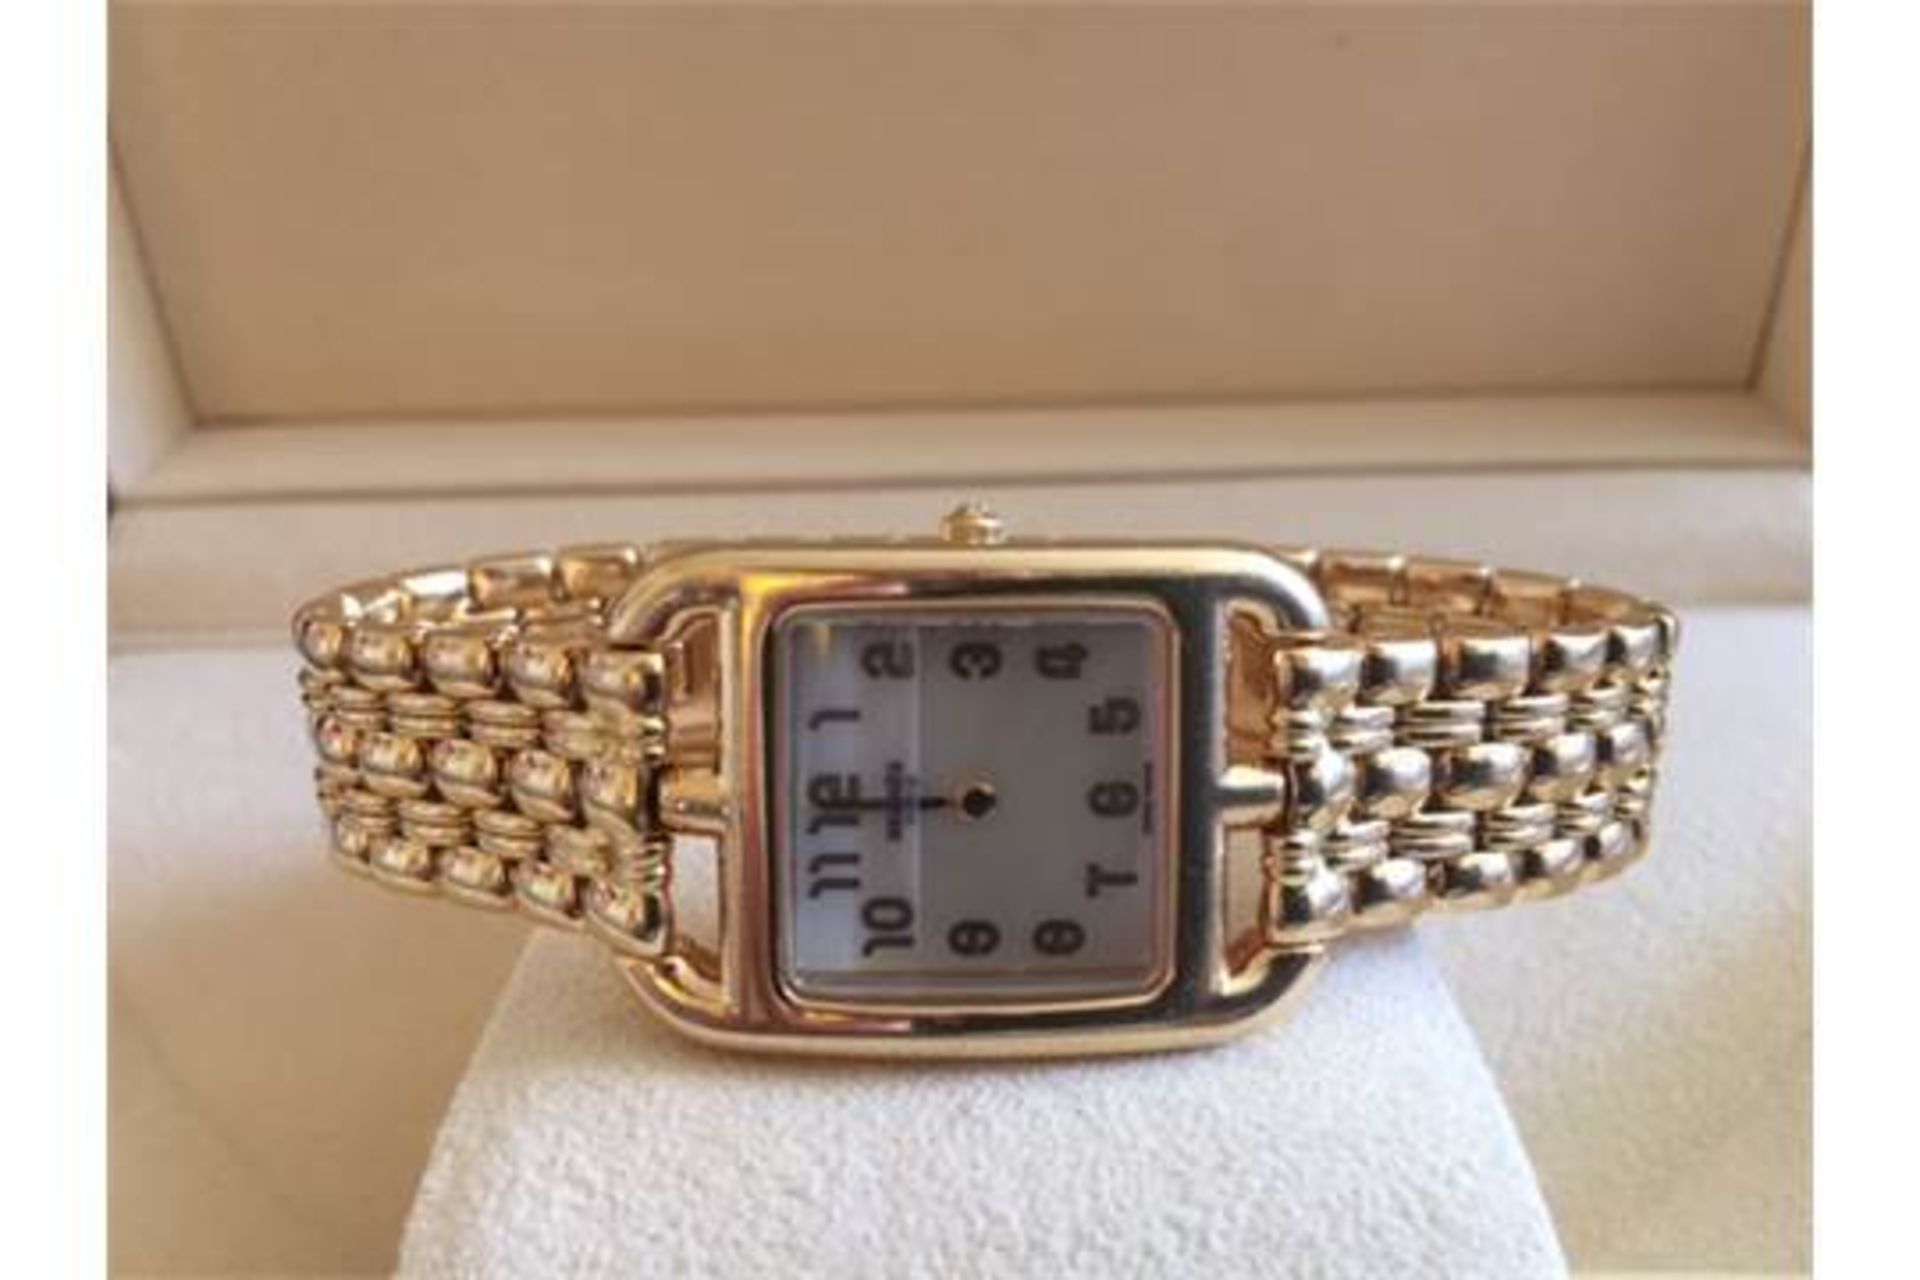 2010 HERMES 18ct SOLID GOLD CAPE COD WATCH WITH MOTHER OF PEARL FACE COST £23,475 NEW WATCH AND - Image 3 of 3